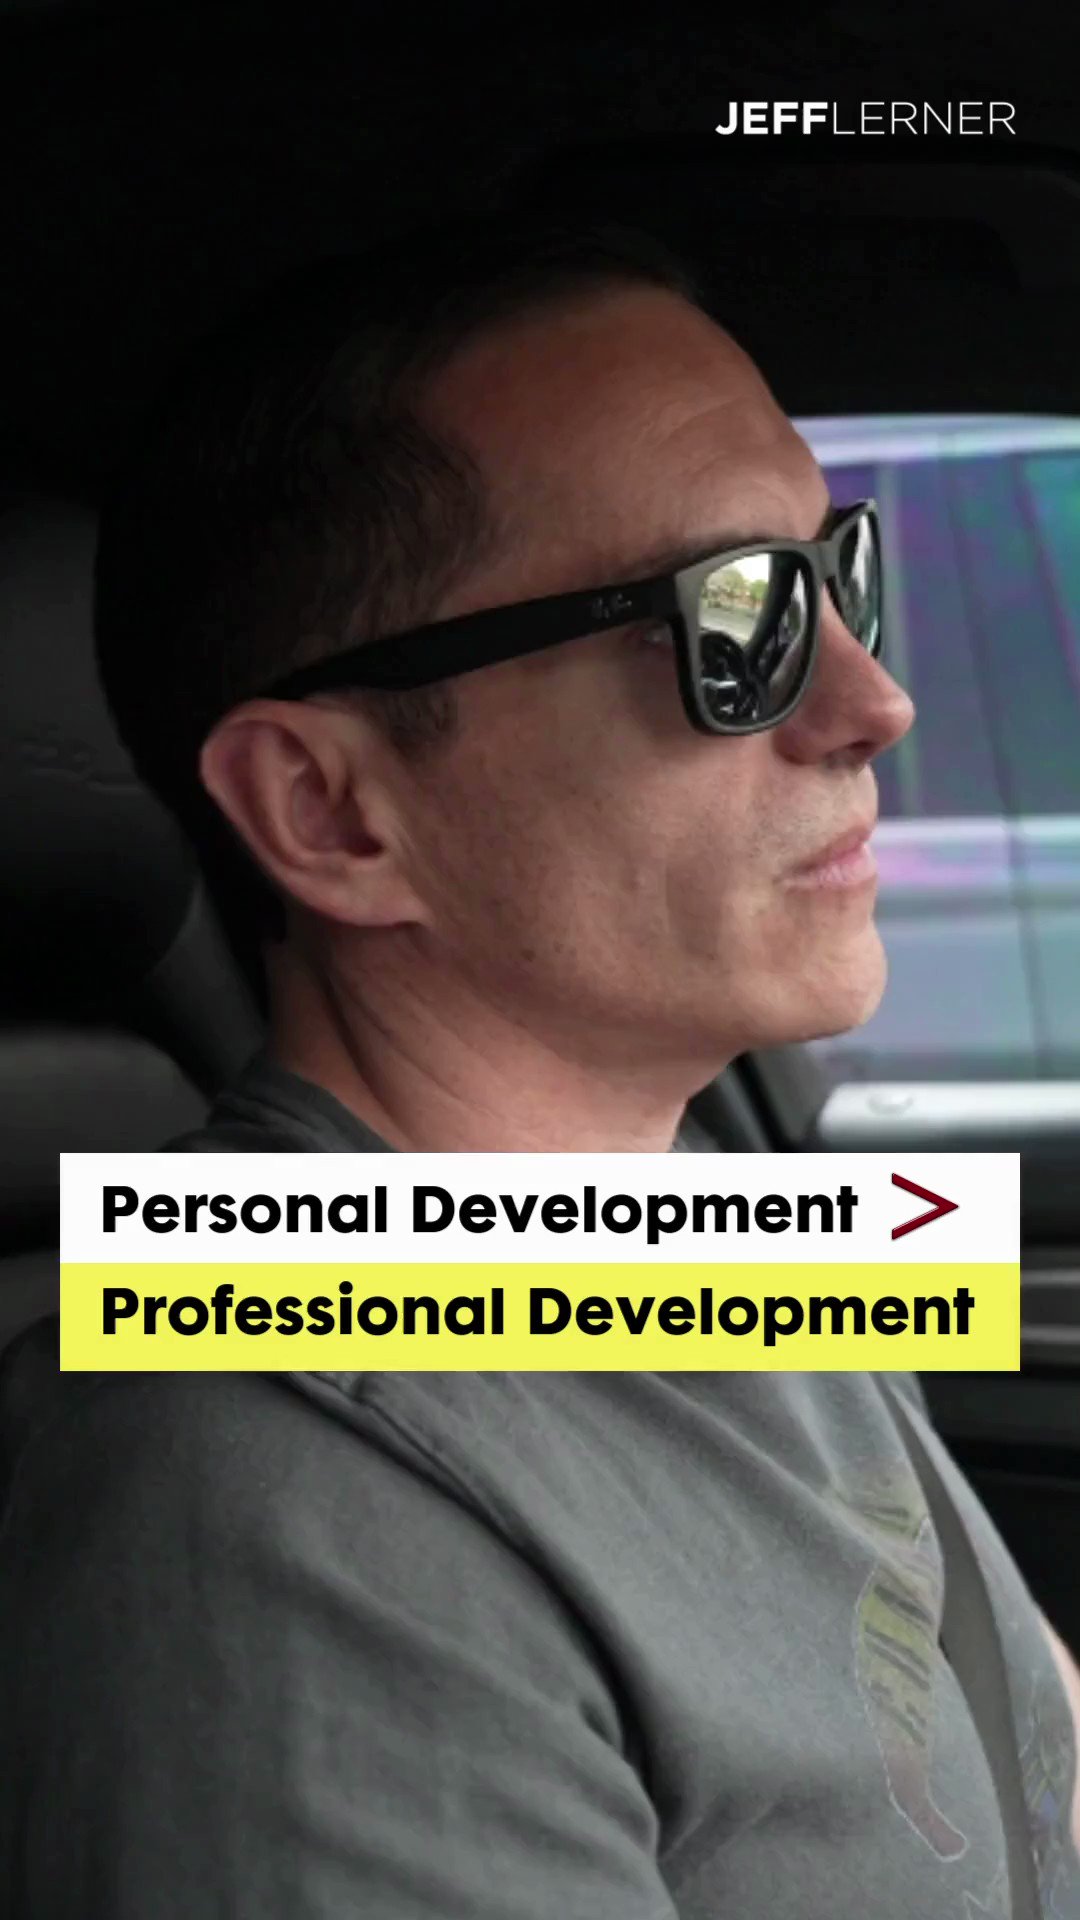 @thejefflerner: Personal development will make you more successful than professional development. Why?Because continuously growing and improving as an individual gives you the skills to excel in ALL areas of your life, not just professionally.